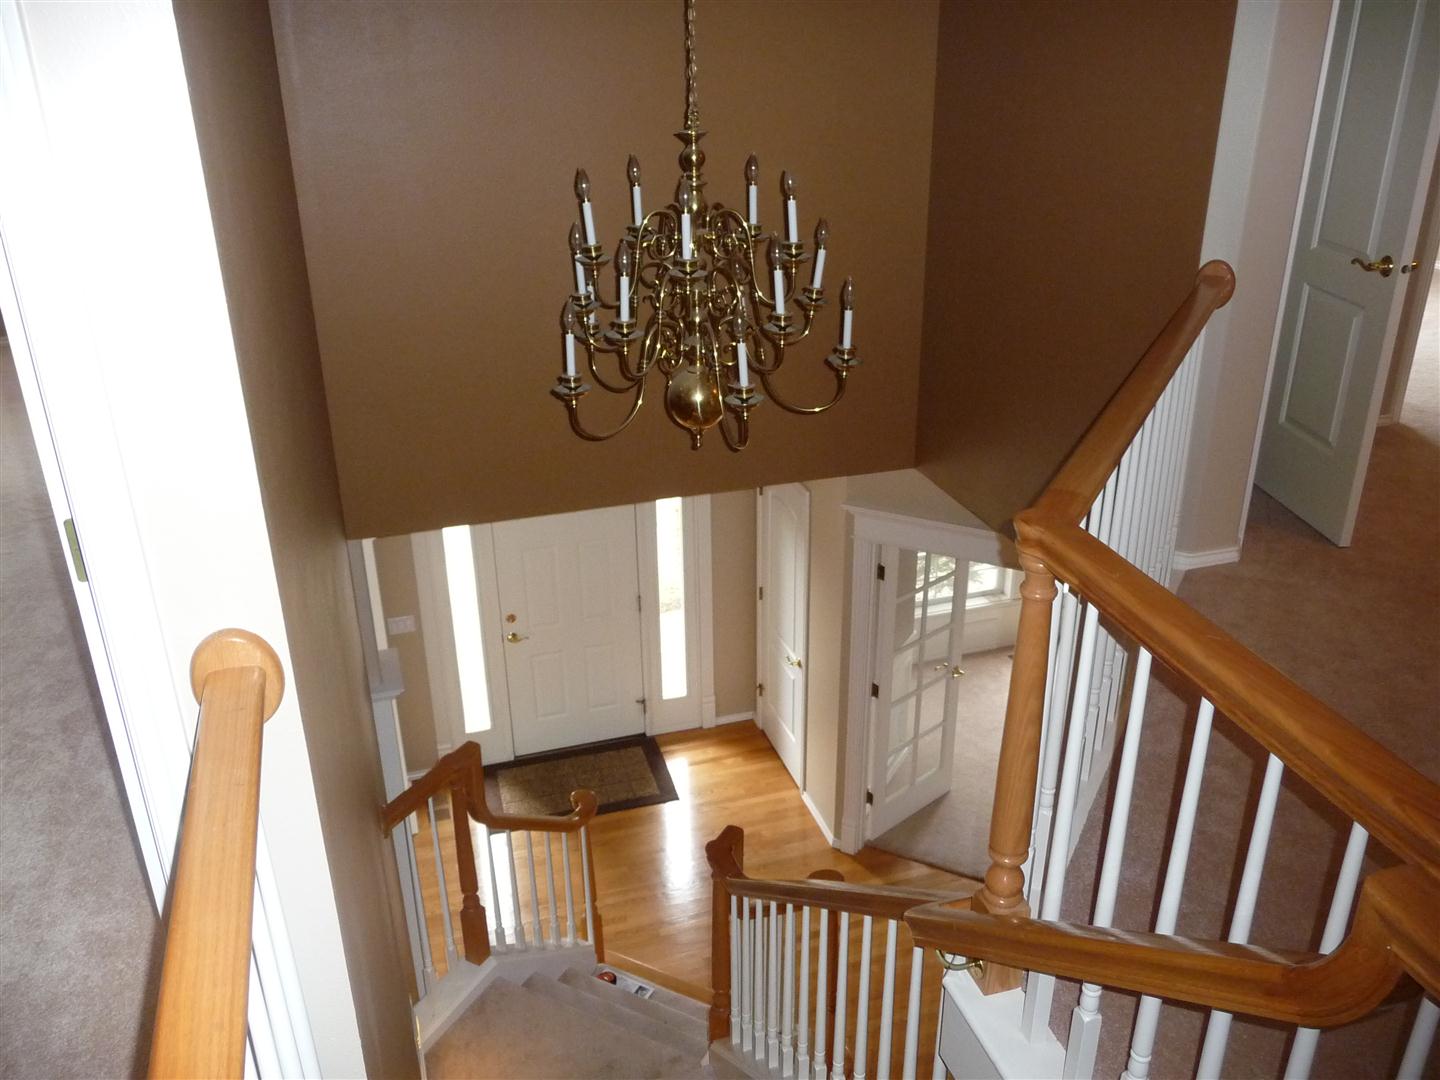 Replacing Chandelier Entry Is 2 Stories Tall Phone Painting Plank House Remodeling Decorating Construction Energy Use Kitchen Bathroom Bedroom Building Rooms City Data Forum - How To Remove A Heavy Chandelier From High Ceiling